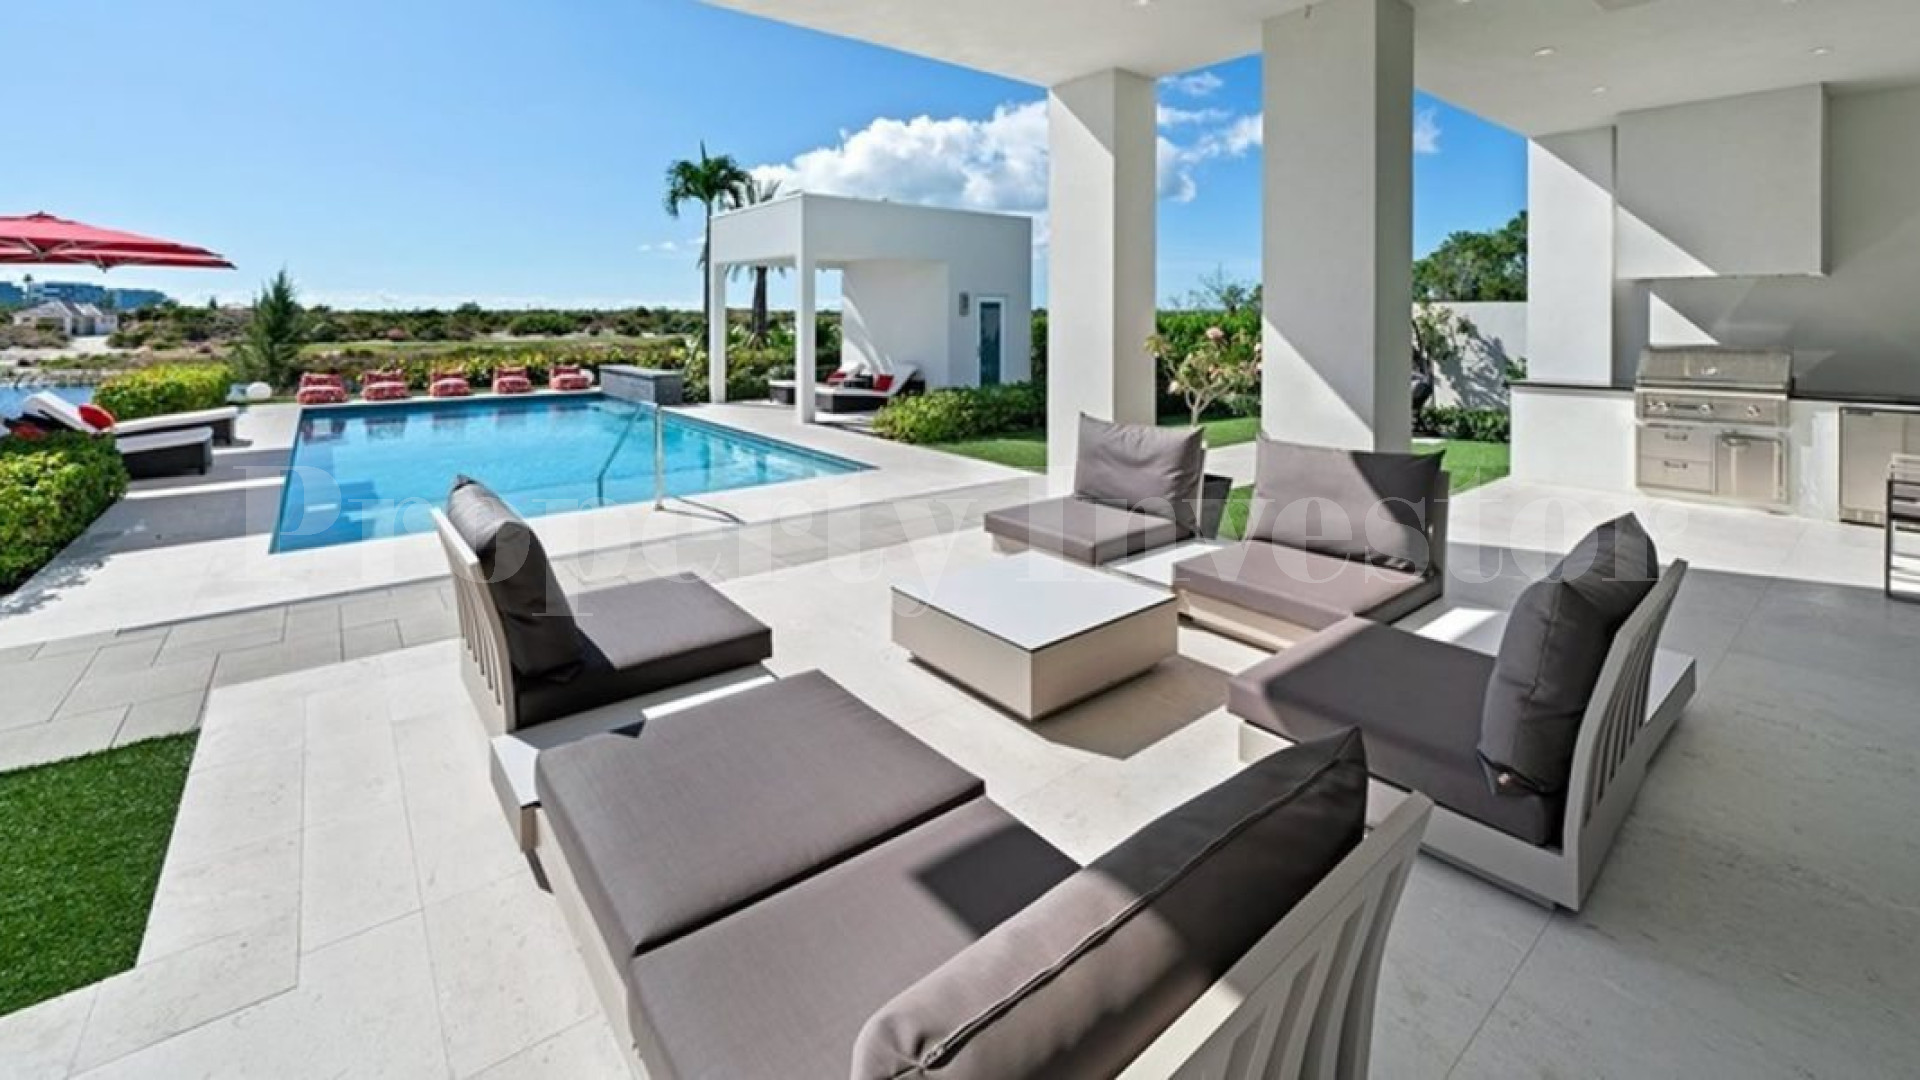 Magnificent 5 Bedroom Luxury Designer Community Golf Villa for Sale in New Providence, Bahamas